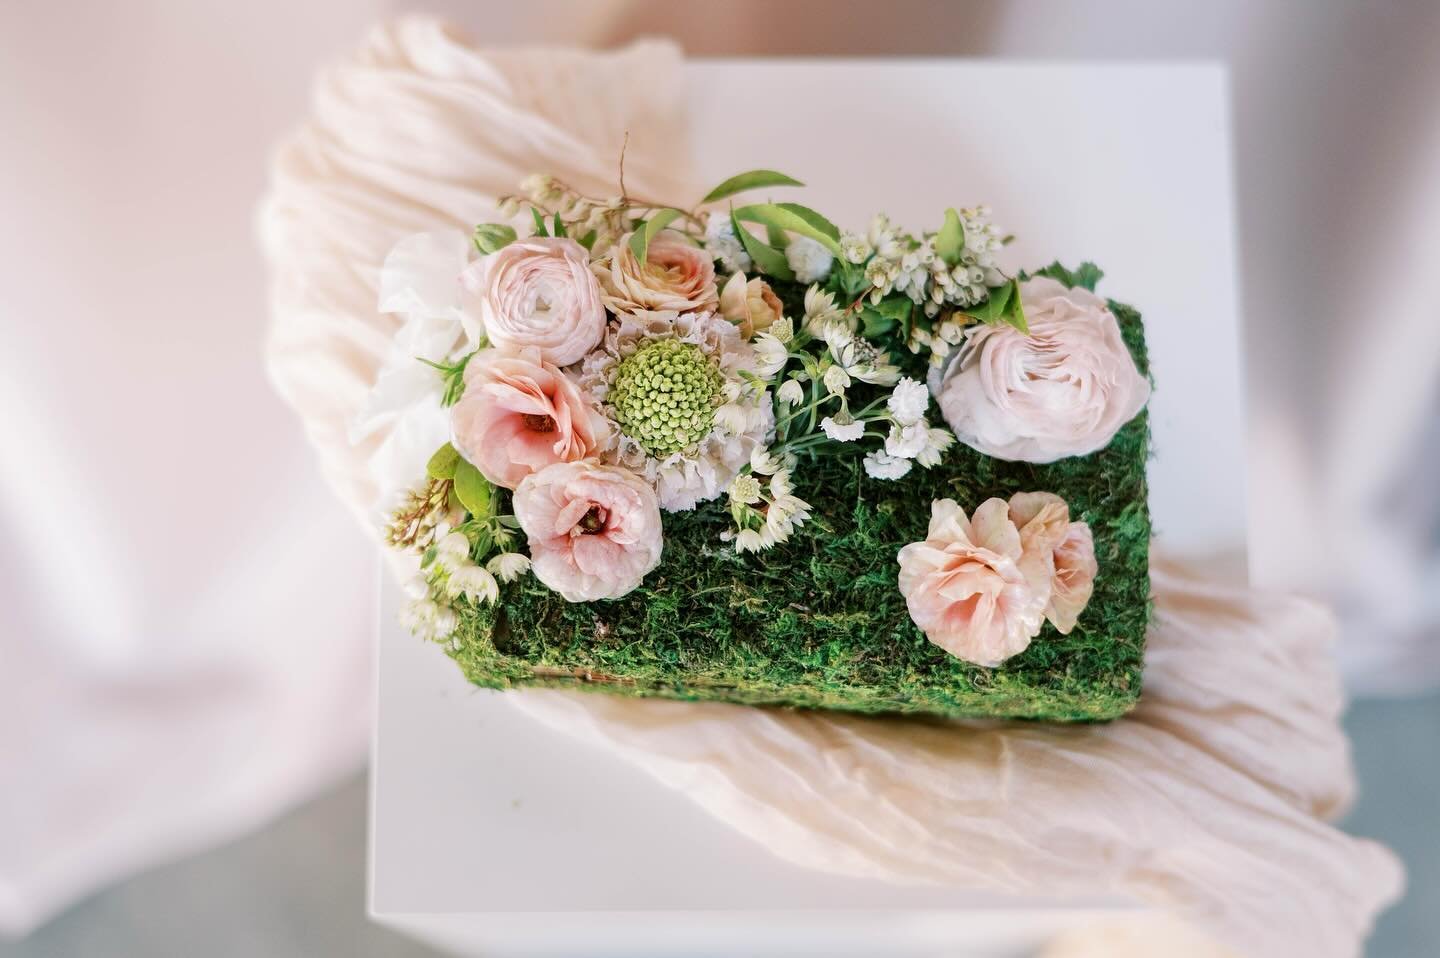 Inspired by a design by @thorne.floral, I decided to create this little beauty with one of my daughter&rsquo;s old purses.

I took it to @sustainablefloristclub meeting which seemed like the perfect place.
And @aliandgarrettphoto graciously captured 